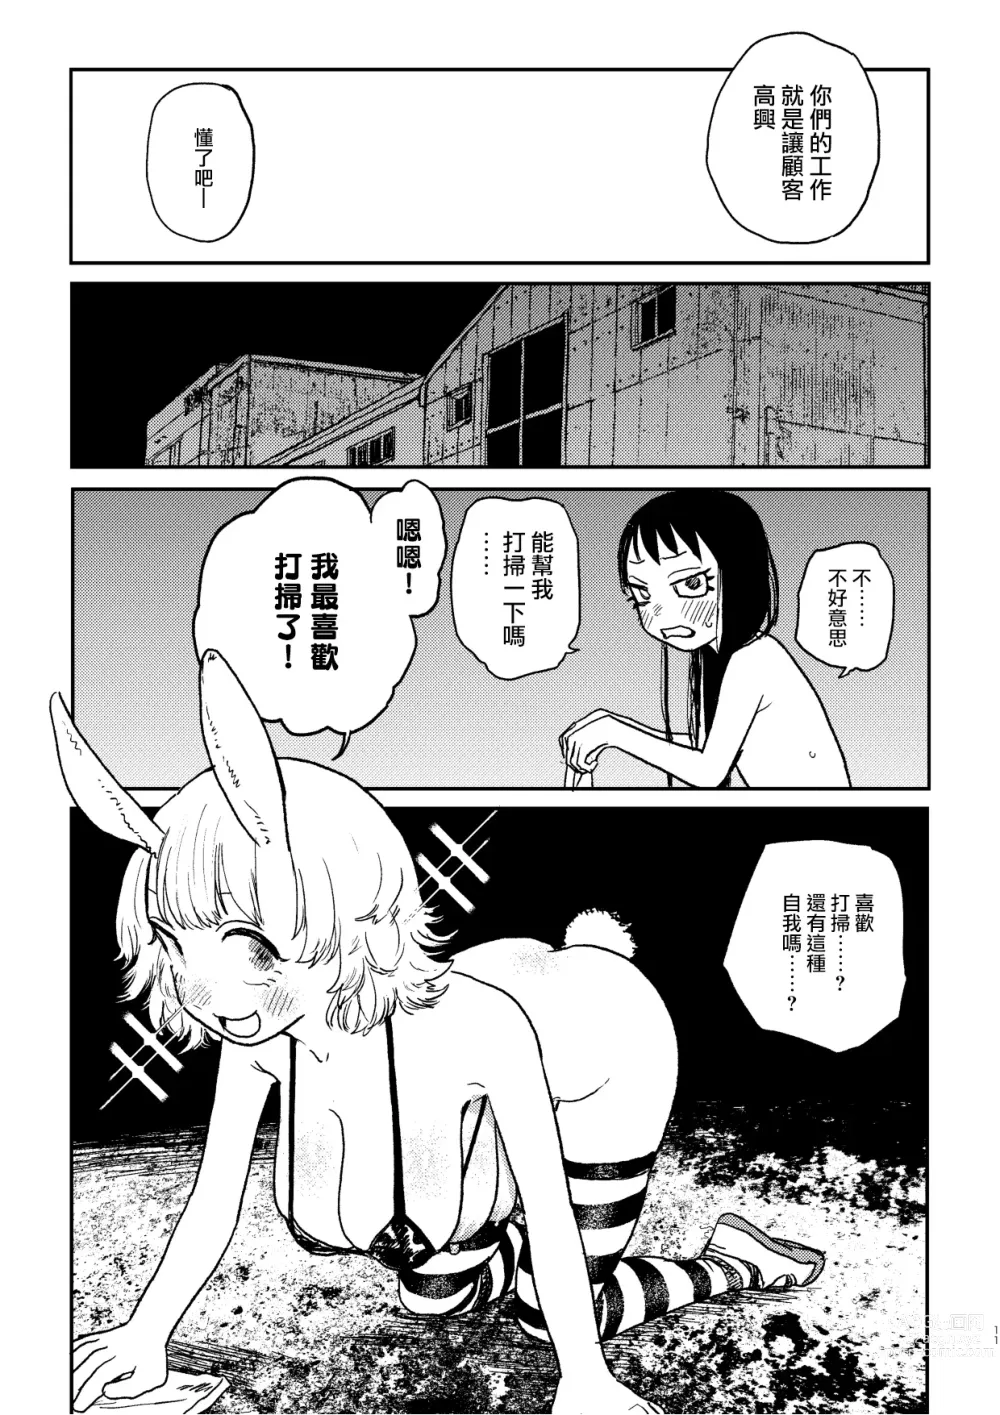 Page 10 of doujinshi better than SEX:A